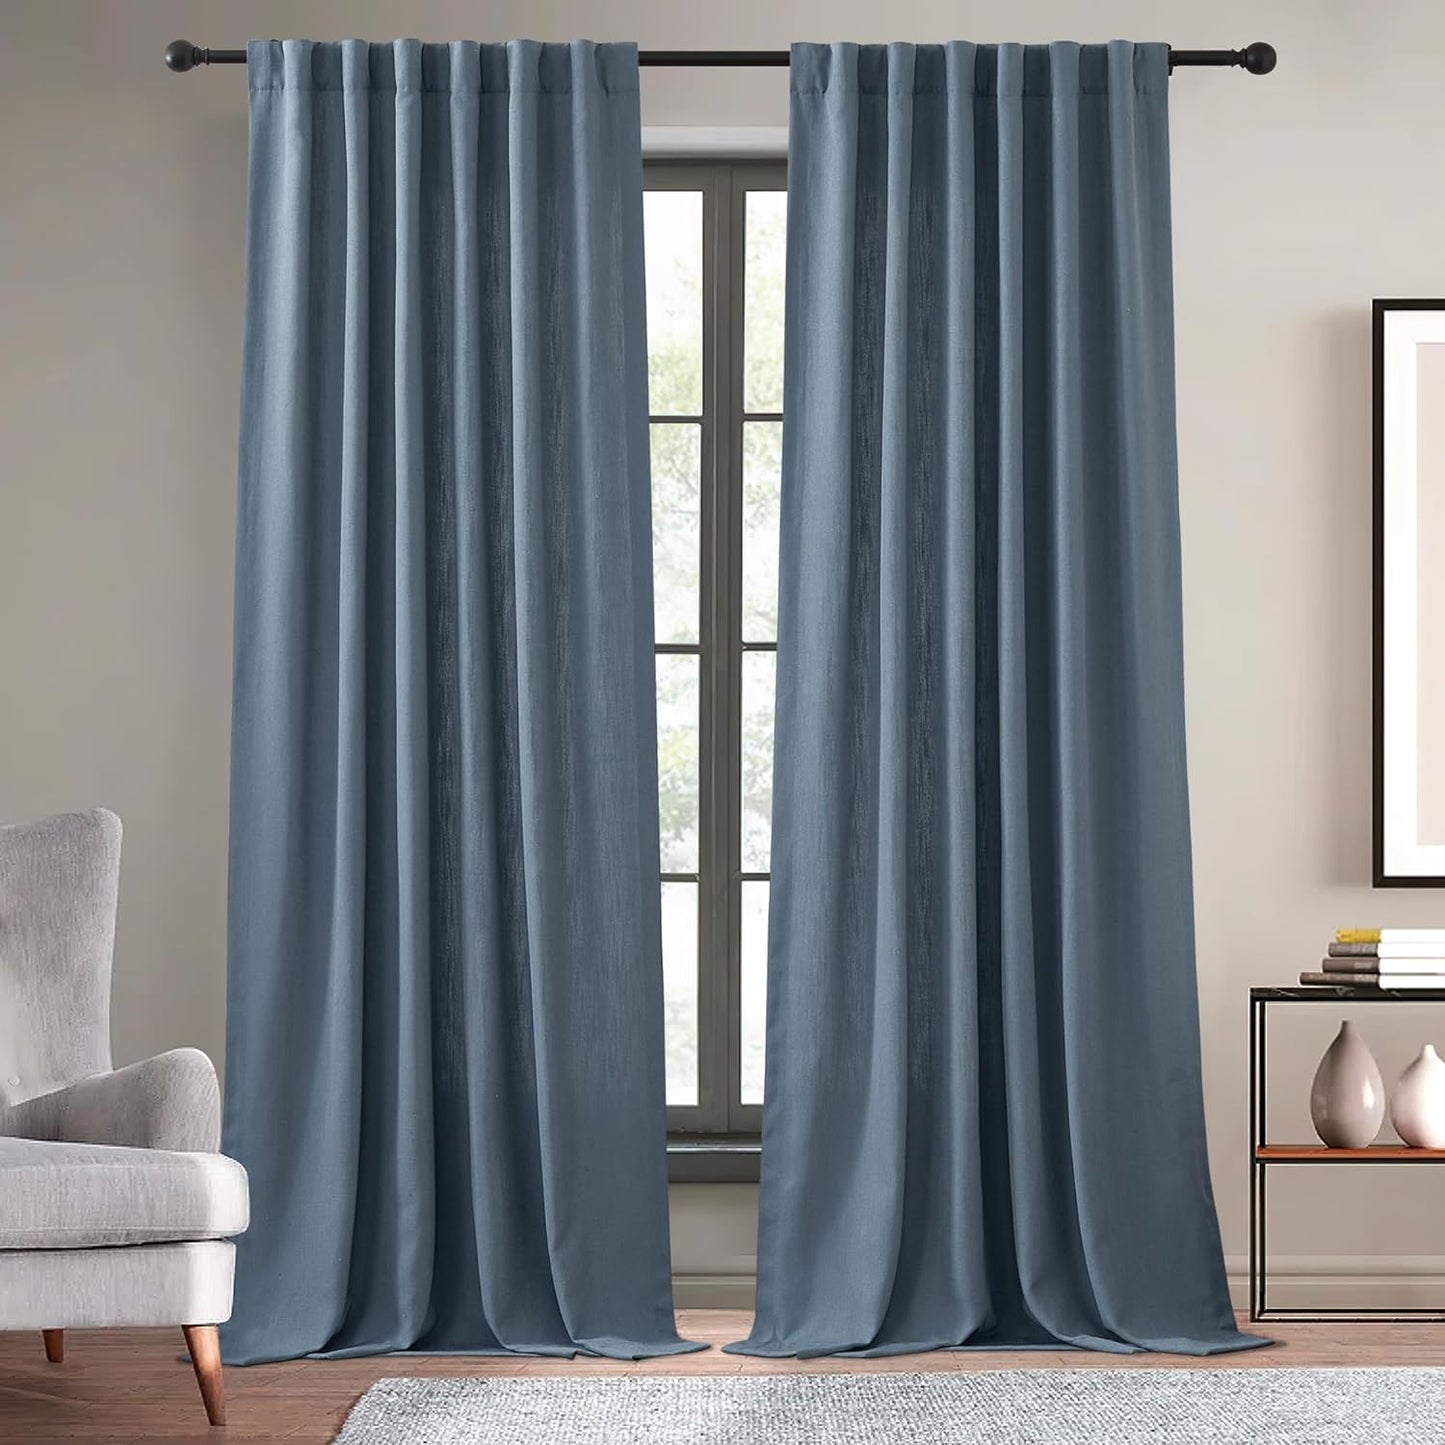 KGORGE Thick Faux Linen Weave Textured Curtains for Bedroom Light Filtering Semi Sheer Curtains Farmhouse Decor Pinch Pleated Window Drapes for Living Room, Linen, W 52" X L 96", 2 Pcs  KGORGE Denim W 52 X L 84 | Pair 